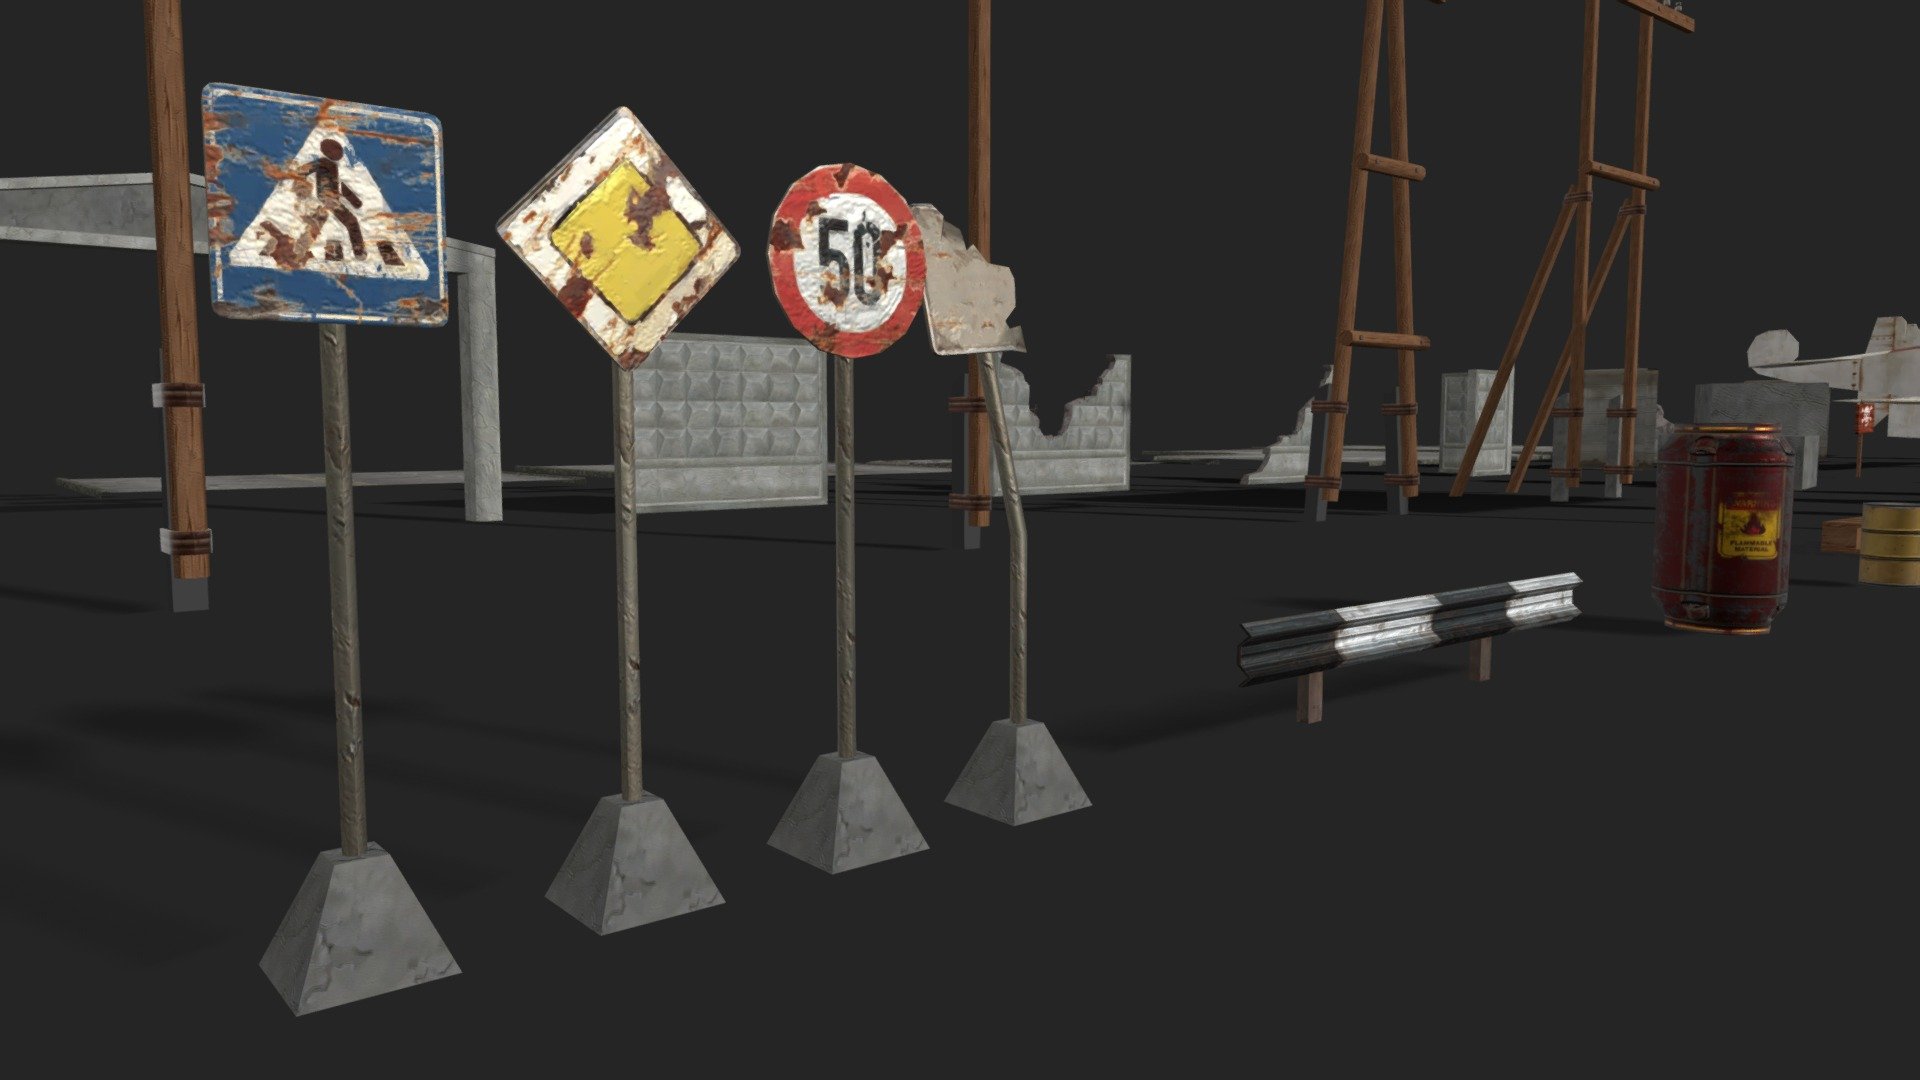 NOTE: this is a set of many models, so it is cheaper to buy it than to buy individual models. You will save $20!

Are you ready to take your game development to the next level? Our 3D low poly models set of street elements is the perfect addition to your toolkit. These models are optimized for maximum performance without sacrificing visual quality, making them ideal for use in any game engine.

Whether you're creating a realistic urban environment or a stylized world, our street elements set will help you bring your vision to life. With attention to detail and an emphasis on usability, you'll be able to quickly and easily integrate these models into your game!

Number of textures: 39   

Polygon count: 13 704 (in total)   

Vertices count: 23 393 (in total)    

Number of meshes/prefabs: 126   

UV mapping: Yes, overlapping   

Types of materials and texture maps: Color 1024x1024, Bump 512x512

+ BONUS high quality game ready skybox! (4096 x 3072 resolution) - Street Elements Game Ready Pack (LowPoly) - Buy Royalty Free 3D model by Flystyler 3d model